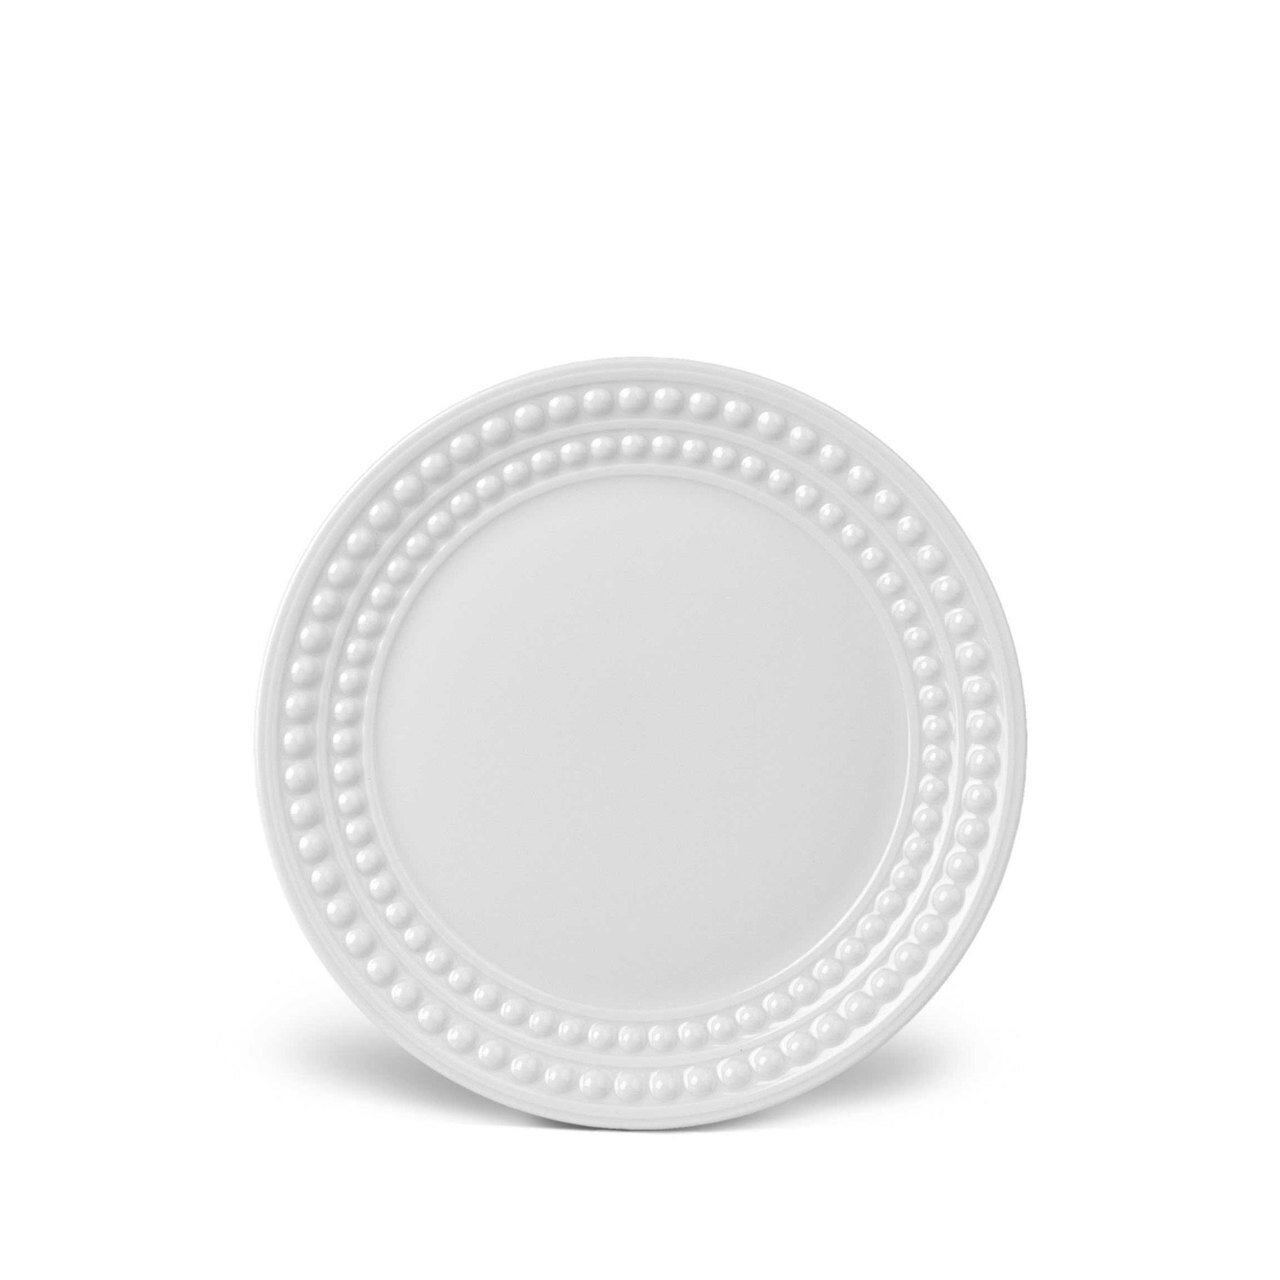 L'Objet Perlee Bread and Butter Plate White